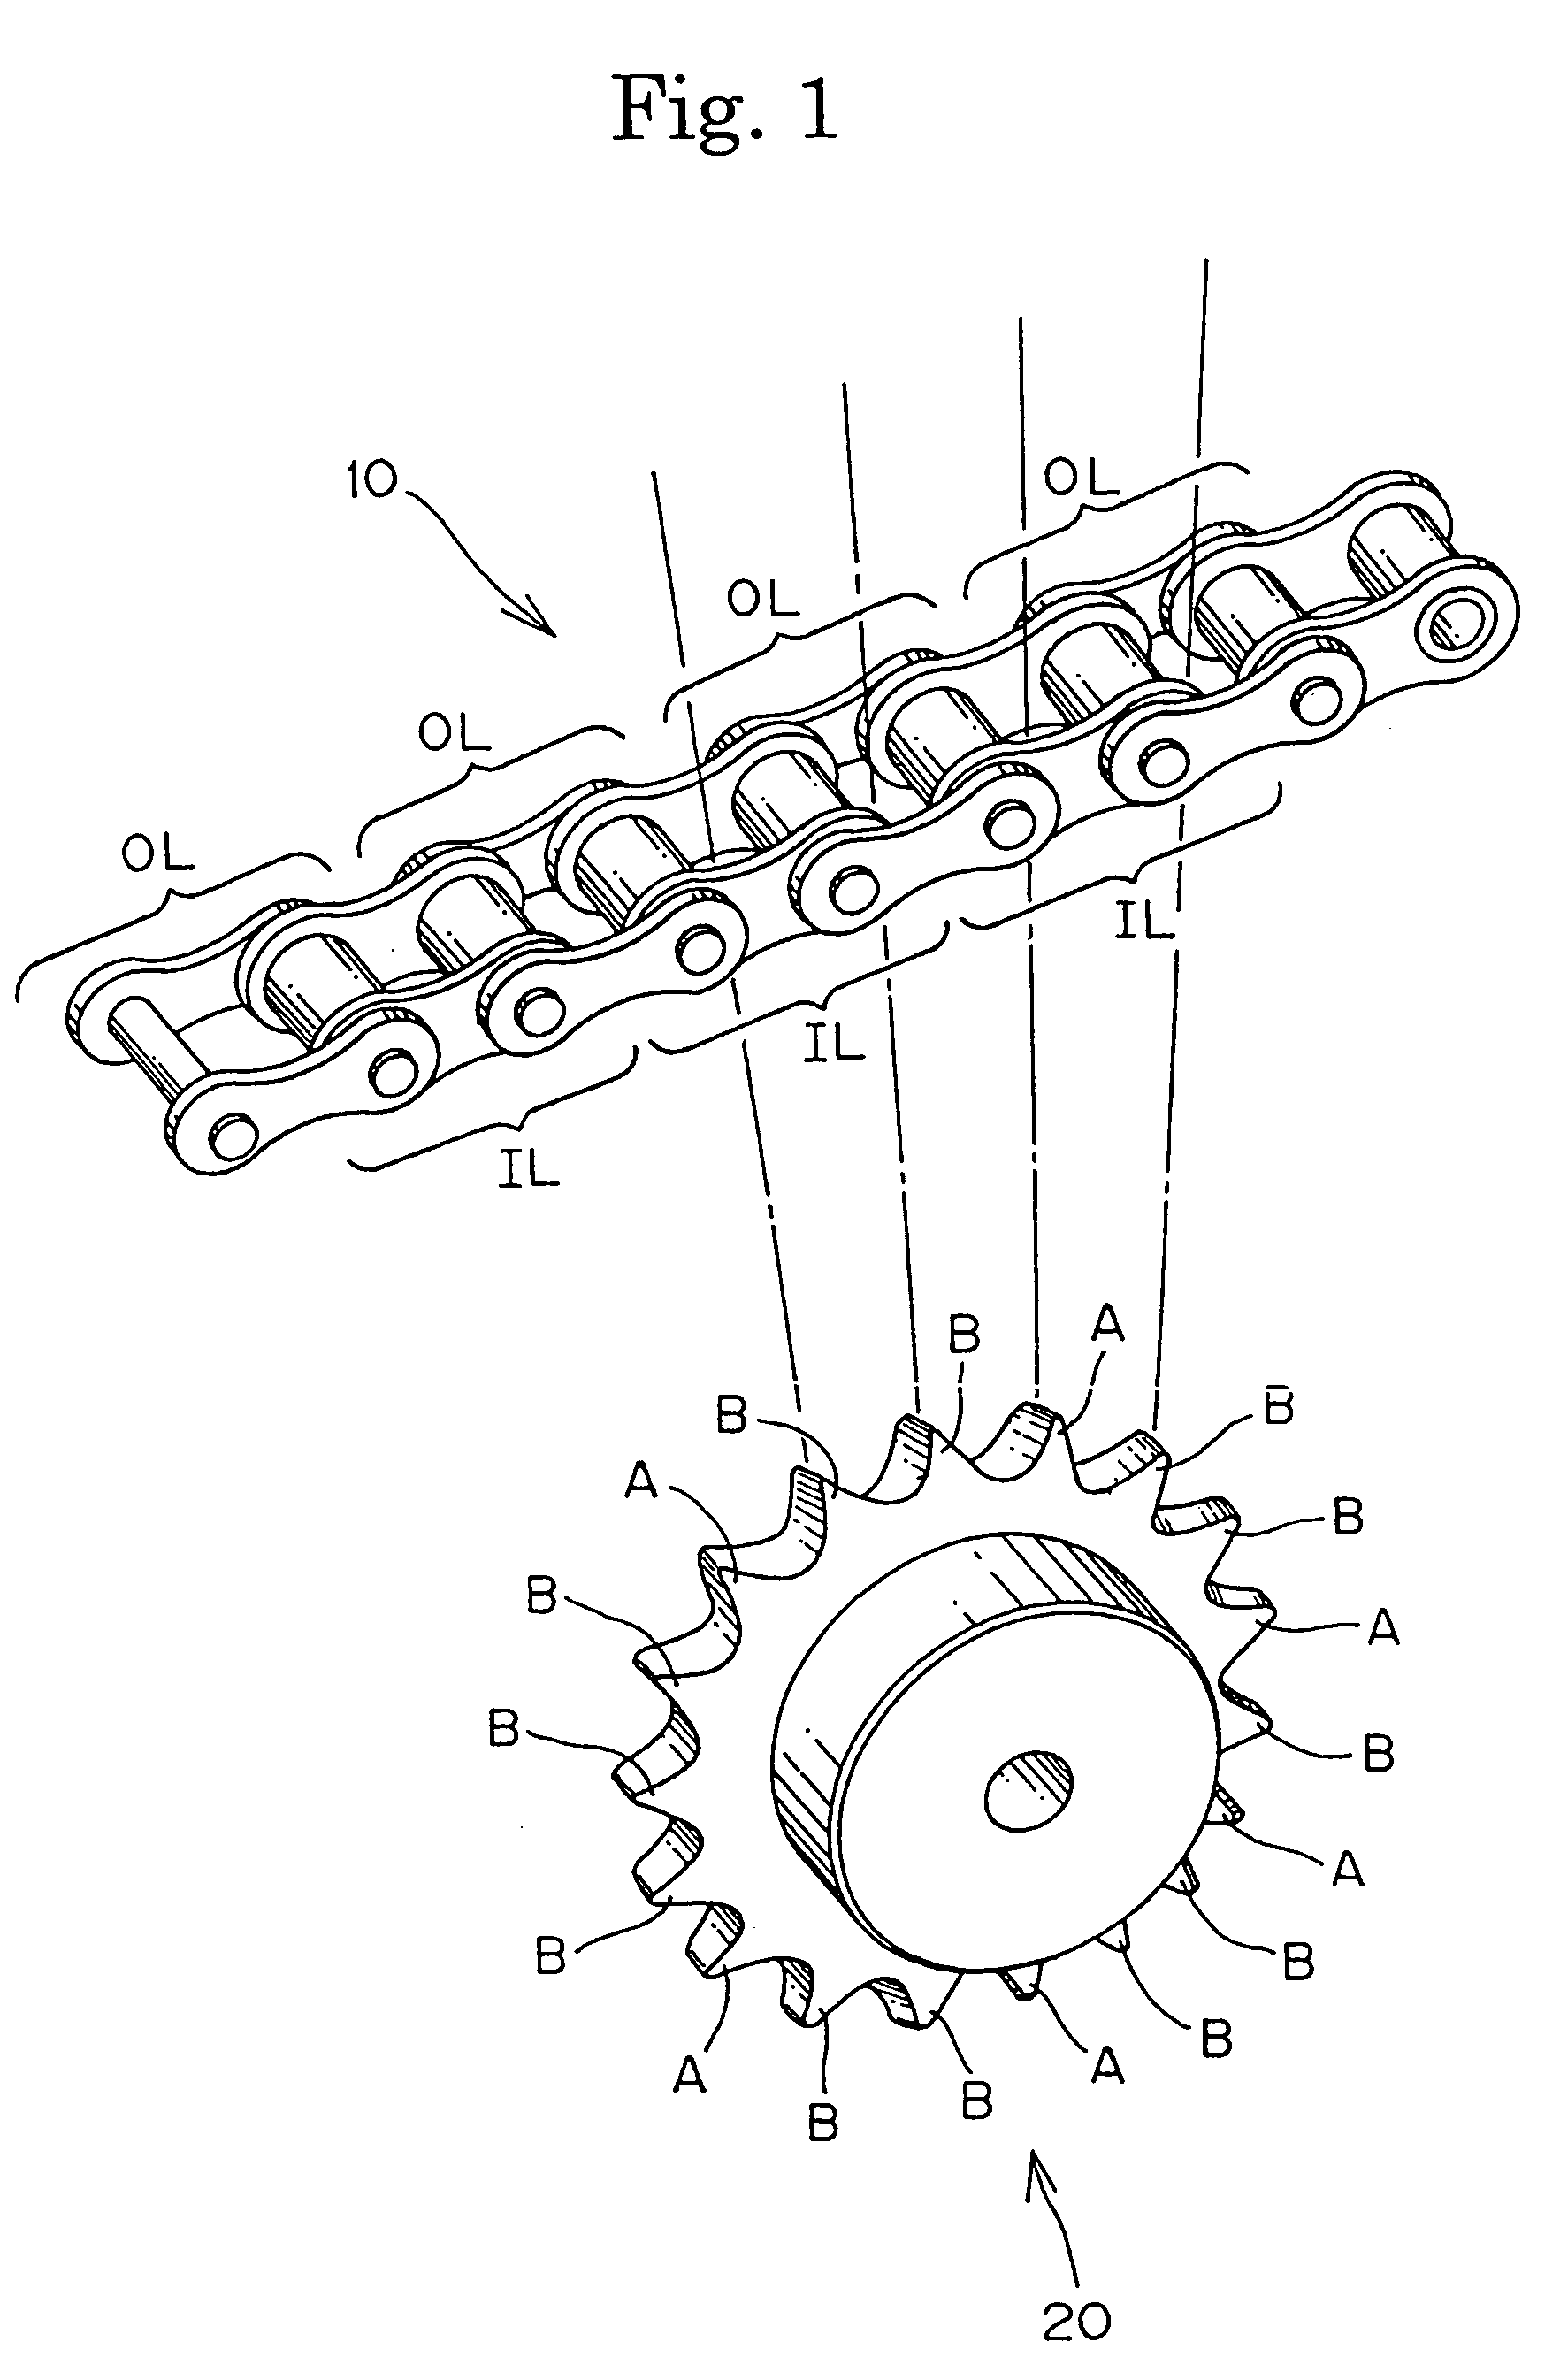 Roller chain transmission device